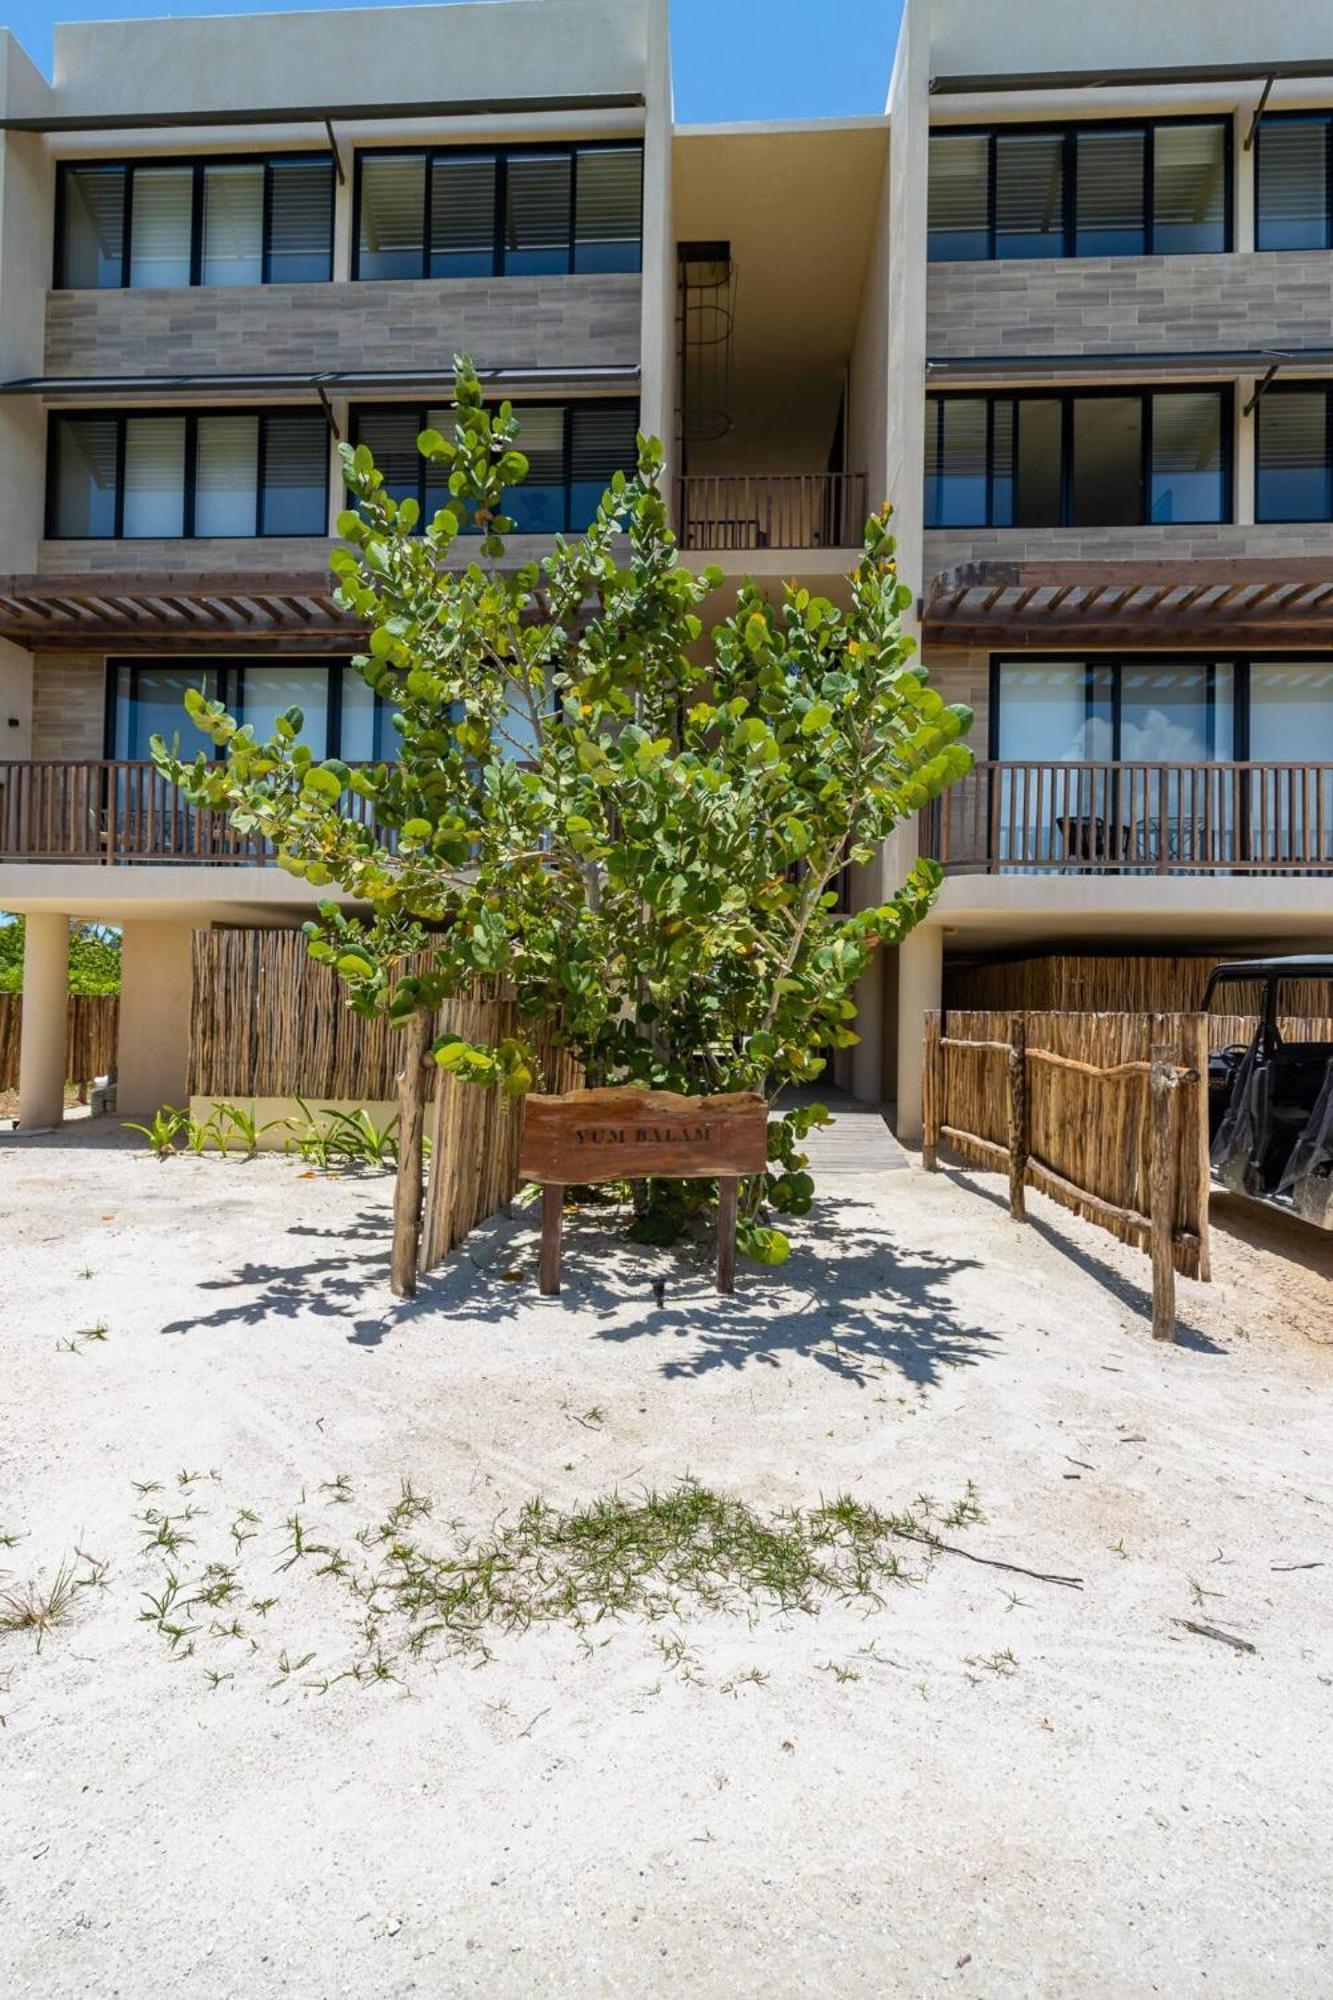 B301 2 Bedroom Ocean View Penthouse With Private Pool Isla Holbox Exterior photo